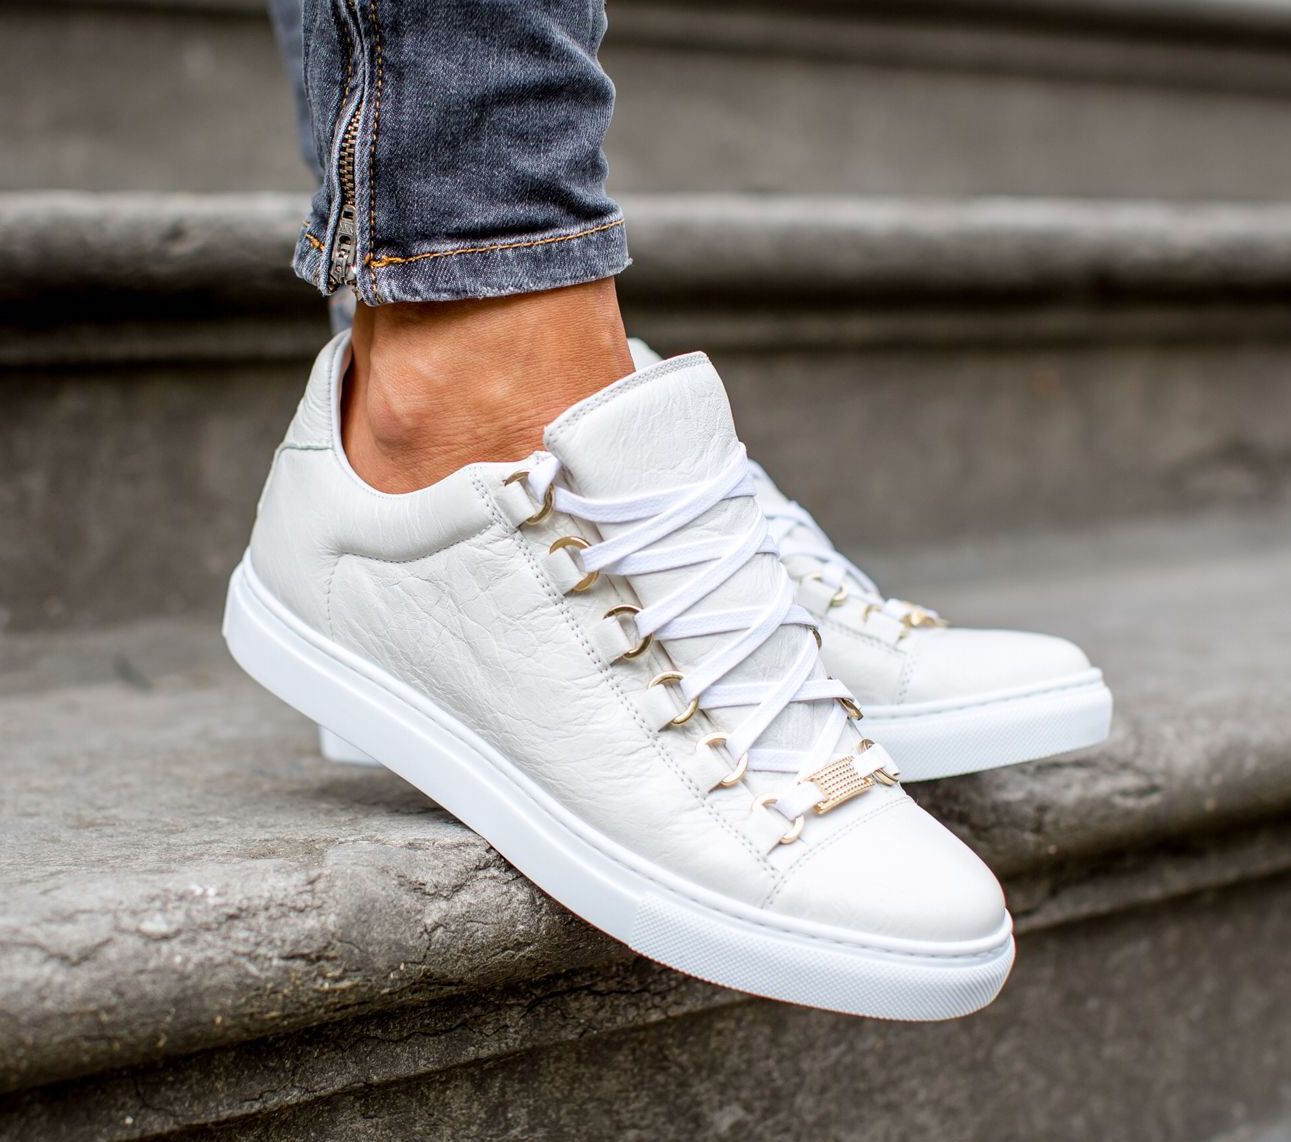 On Sale: Balenciaga Arena Leather Low "Off White" — Sneaker Shouts